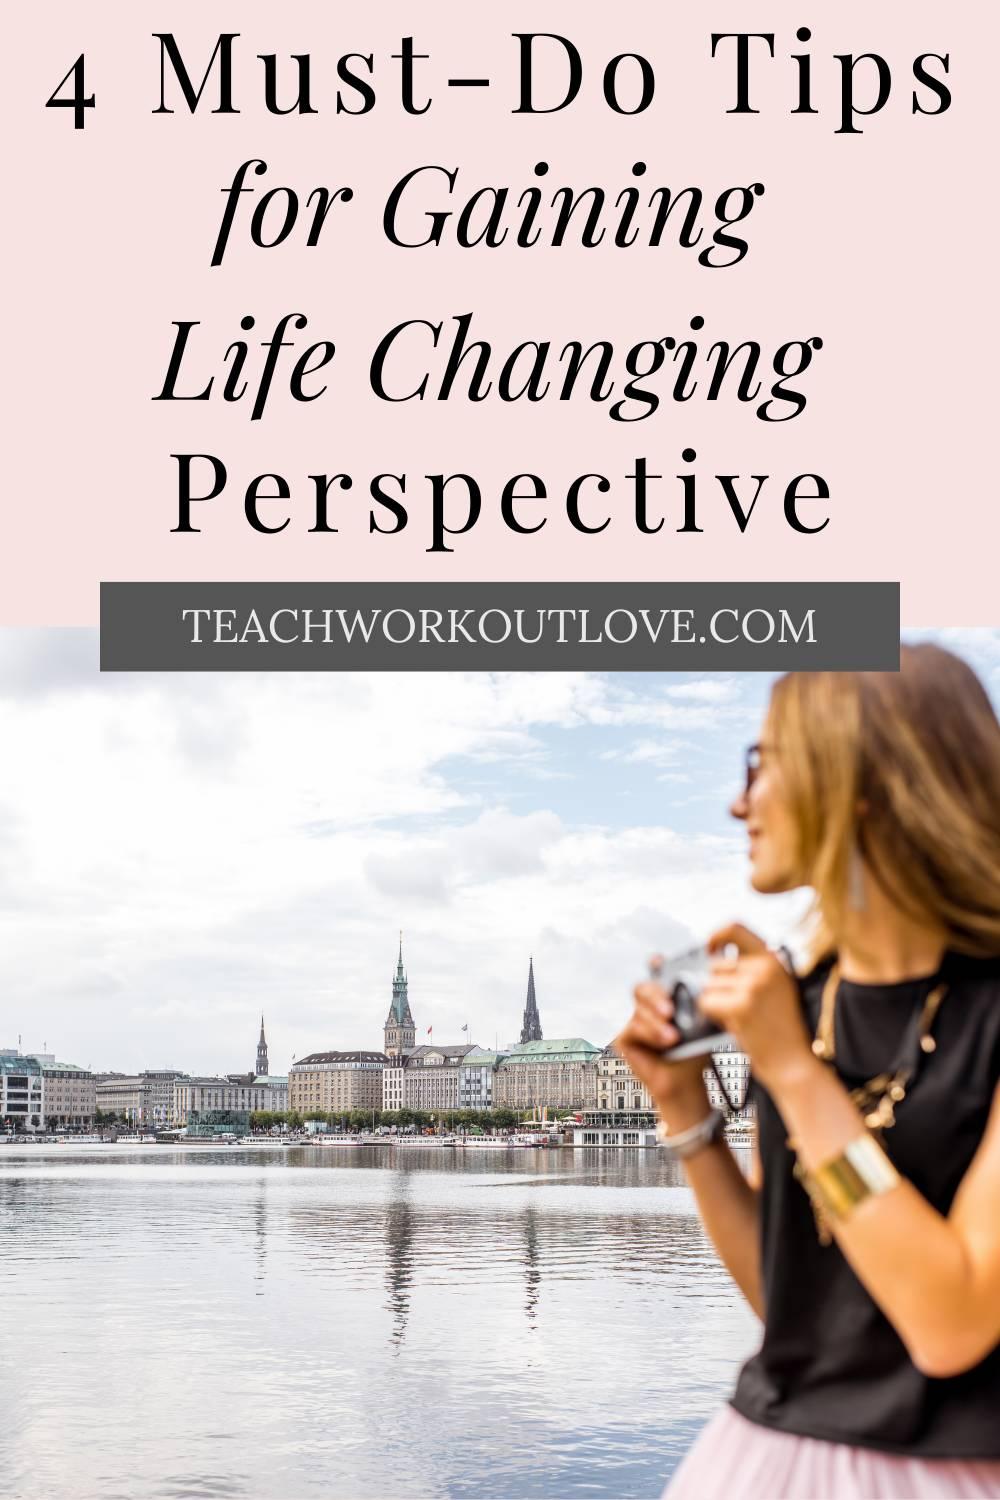 Here's tips for getting a bit more life changing perspective on a regular basis, so that you can ensure you are living to the fullest.